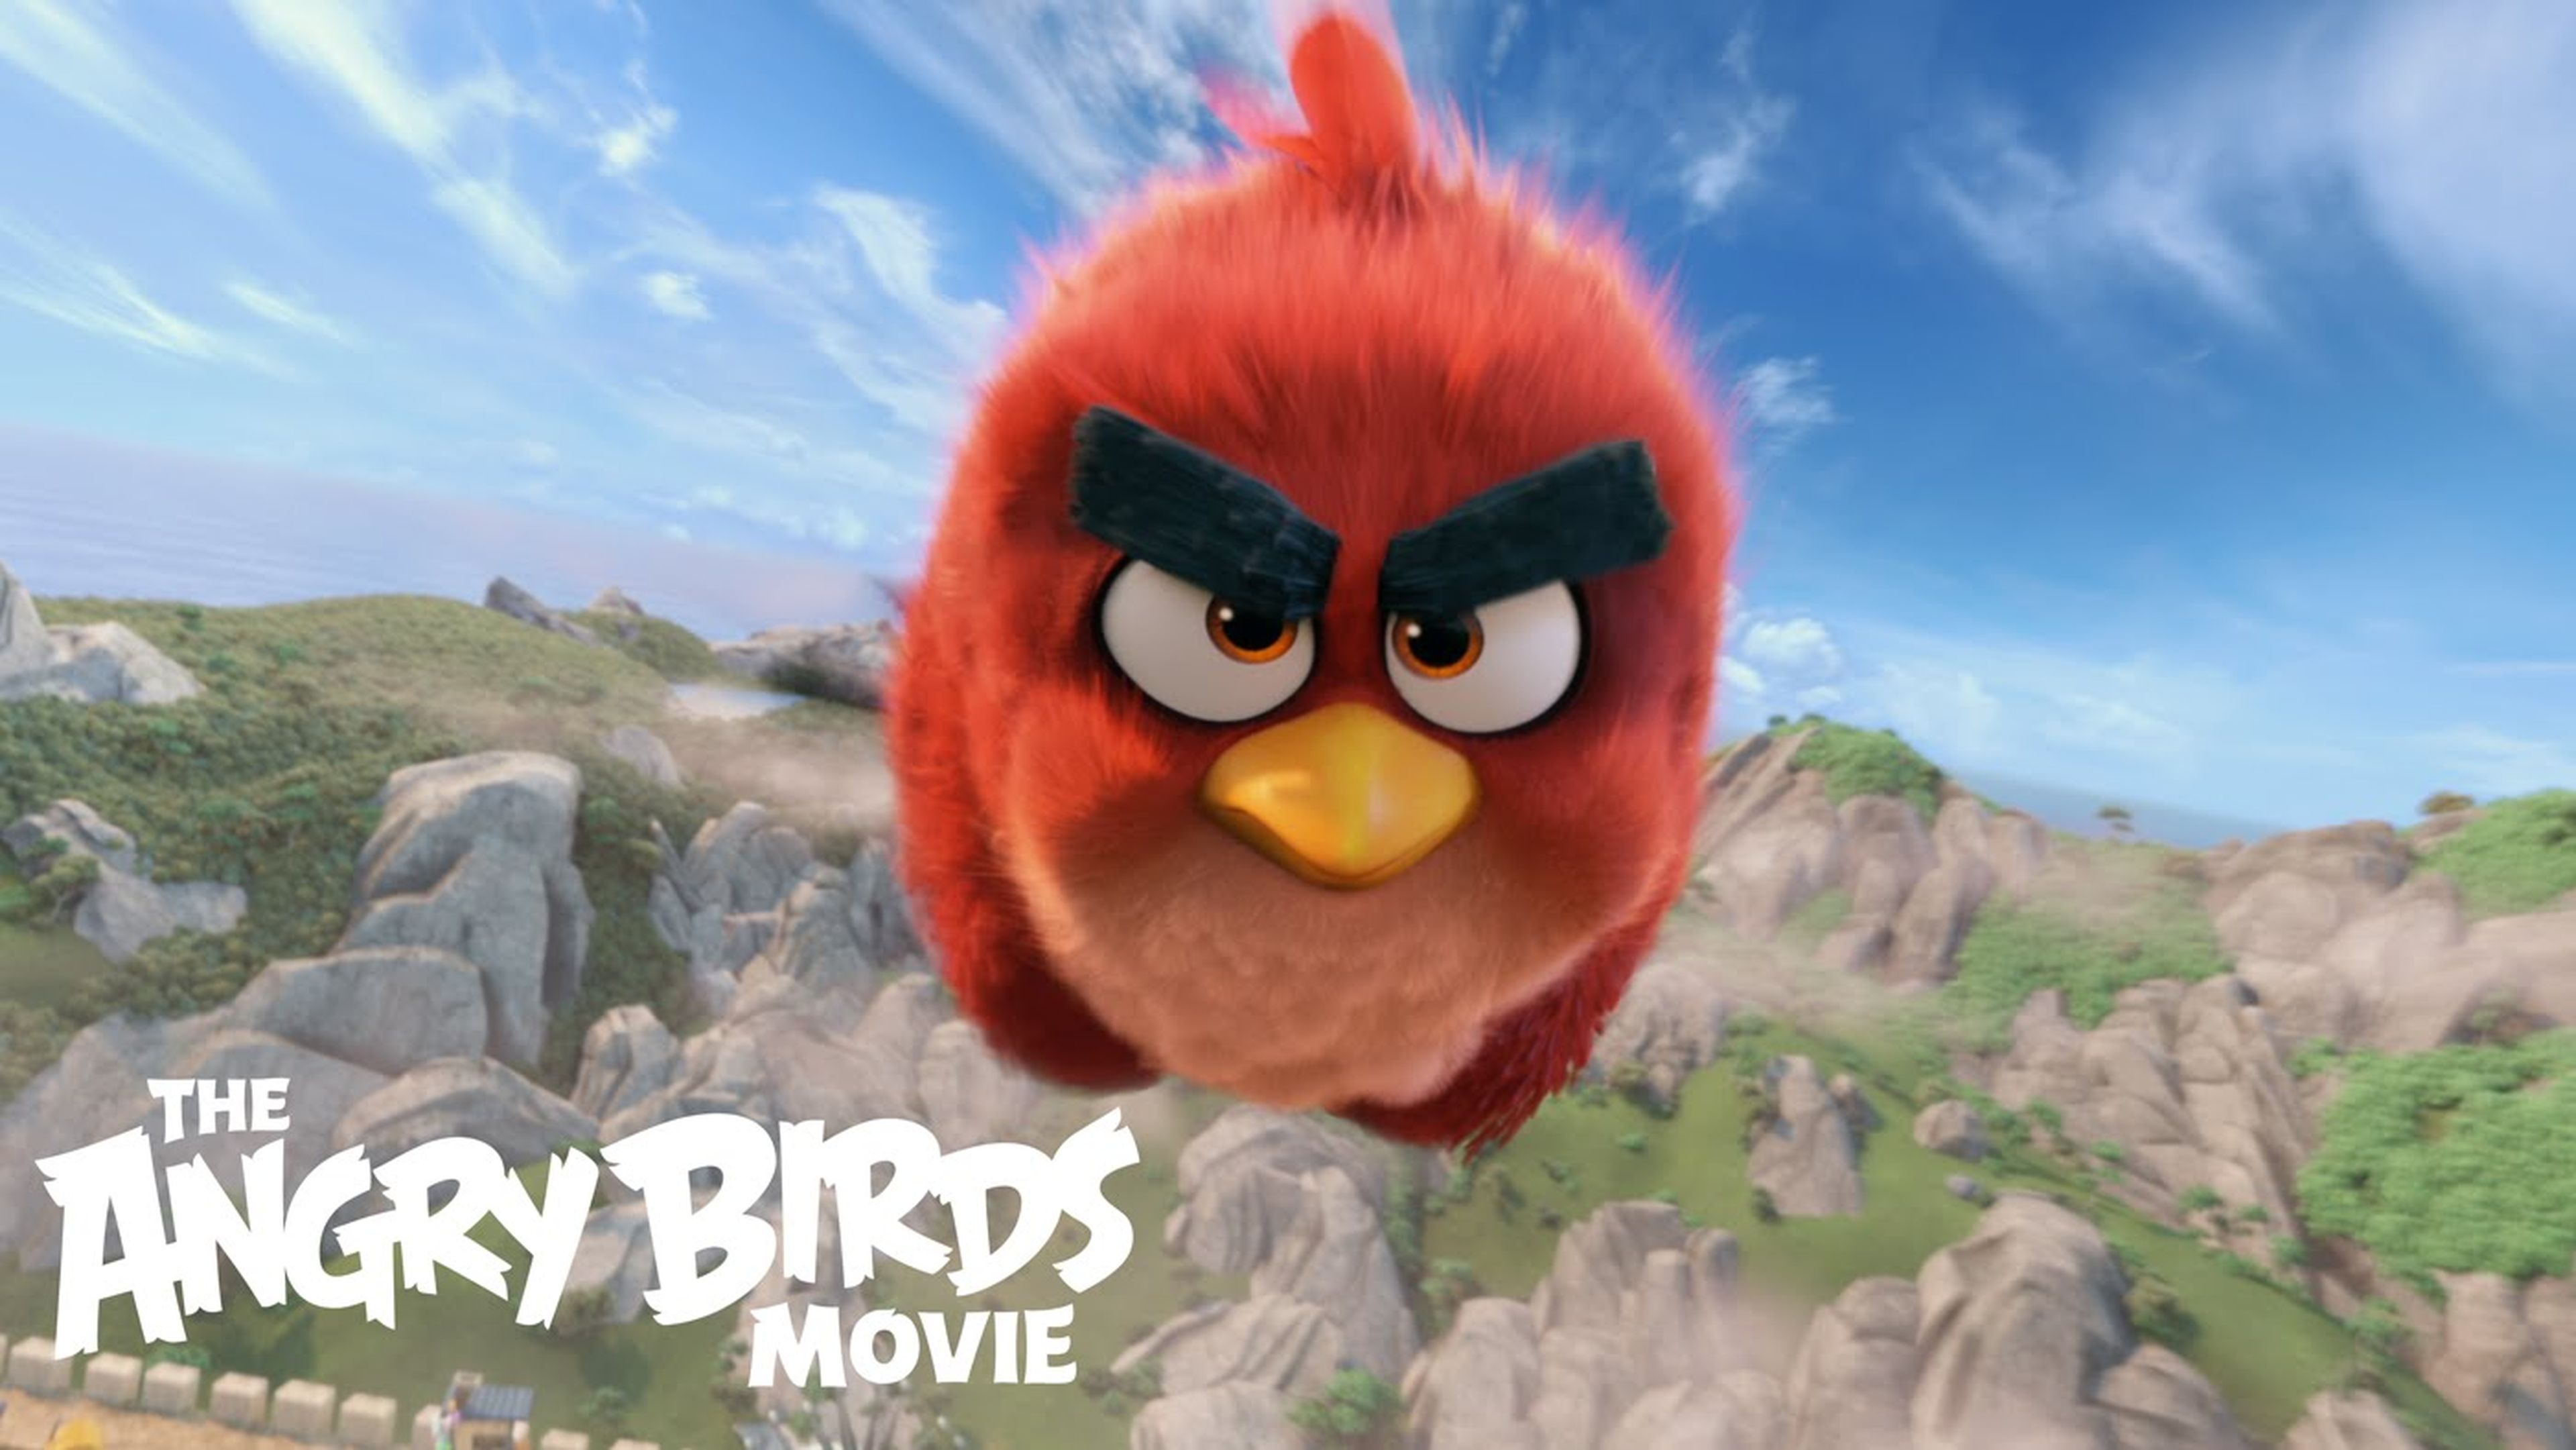 6. Angry Birds